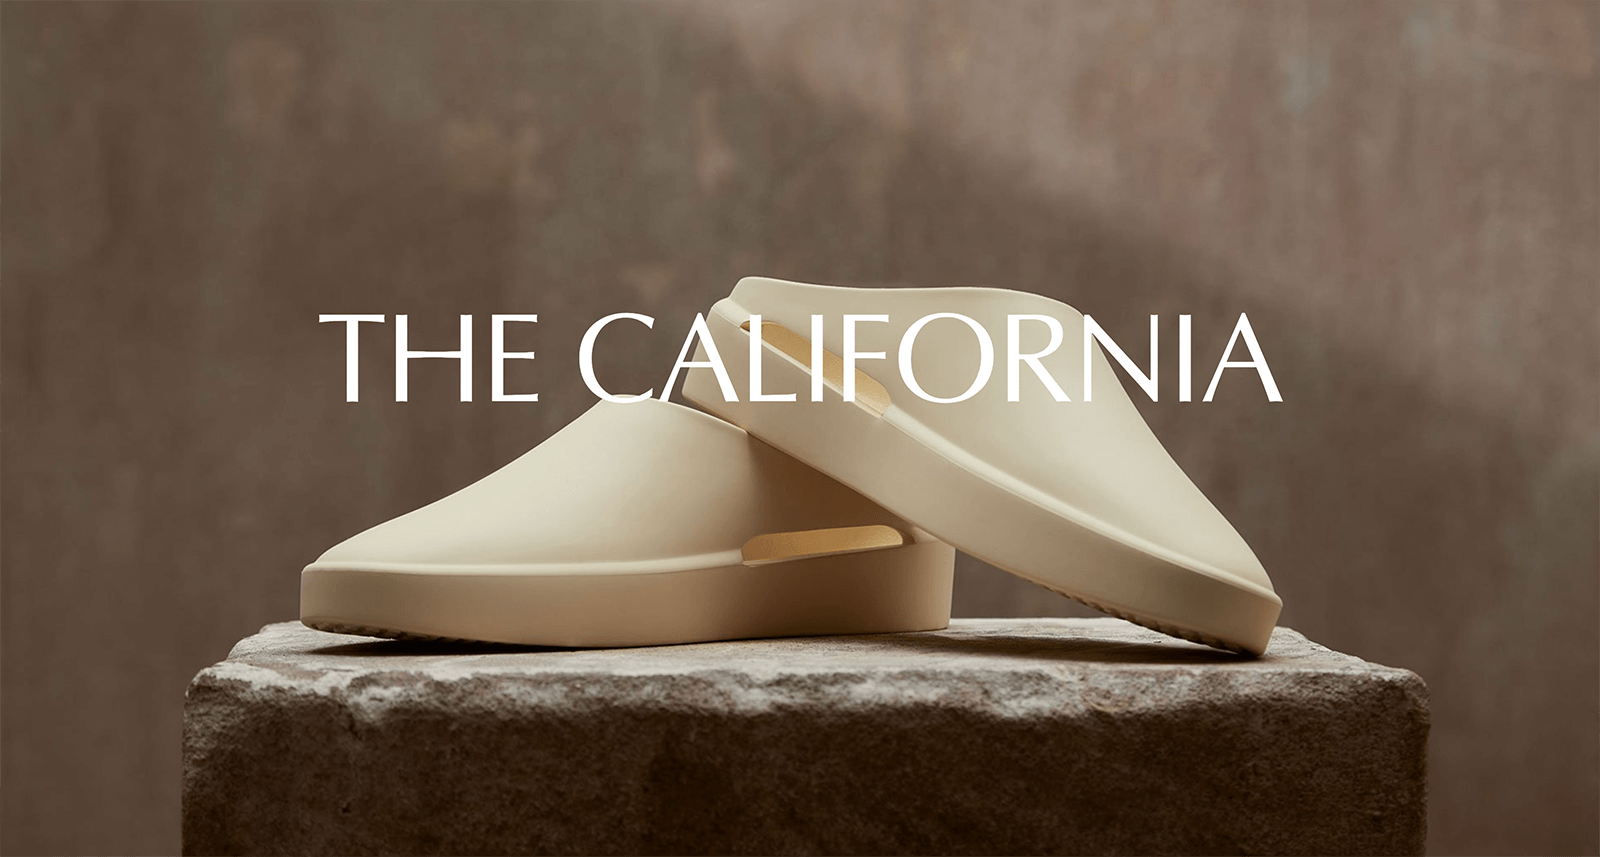 THE_CALIFORNIA_LOGO.png image from FEAR OF GOD RAL7000STUDIO project created on 2021-06-01